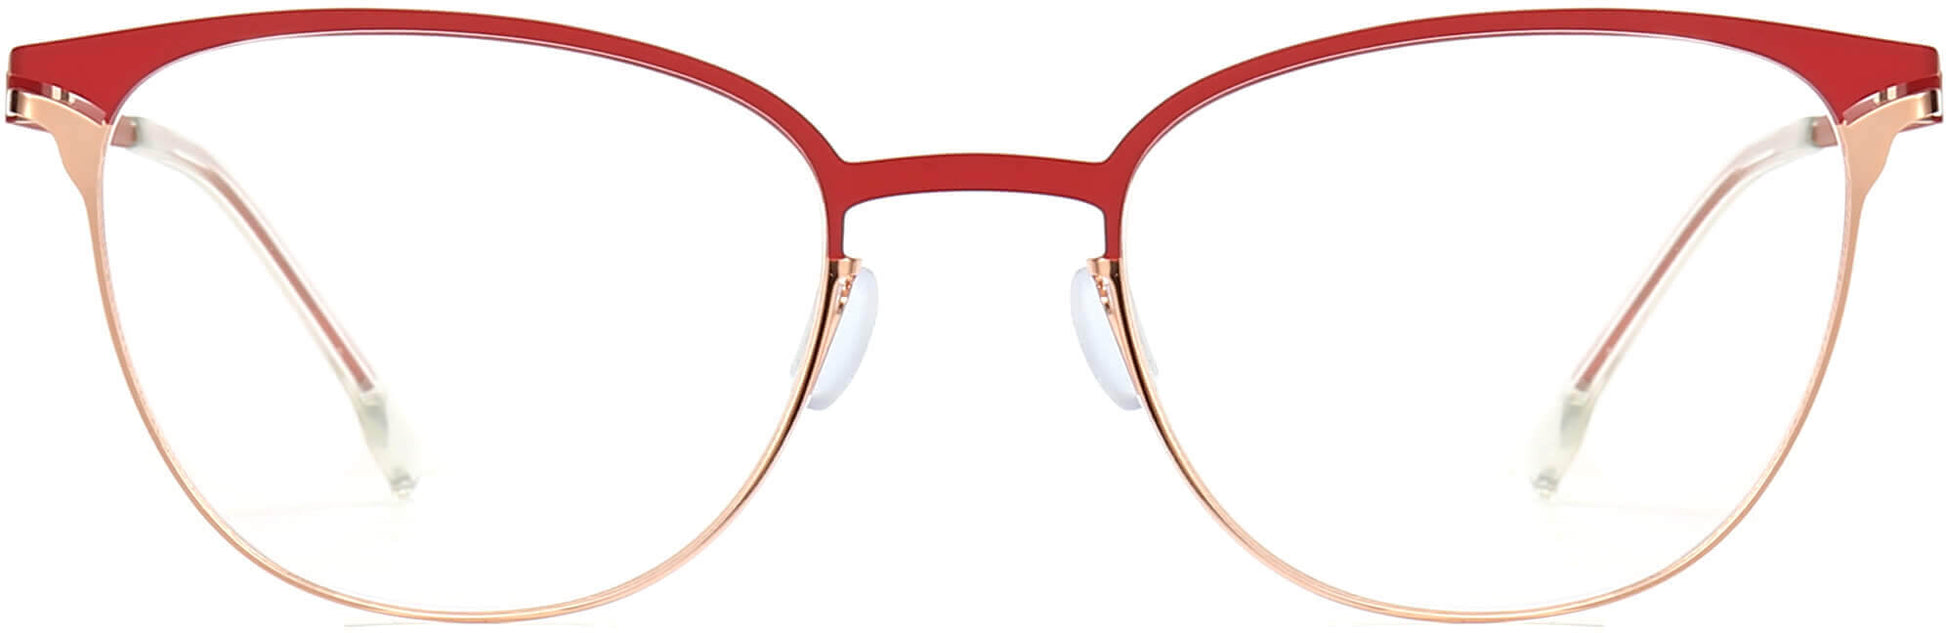 Thea Cateye Red Eyeglasses from ANRRI, front view